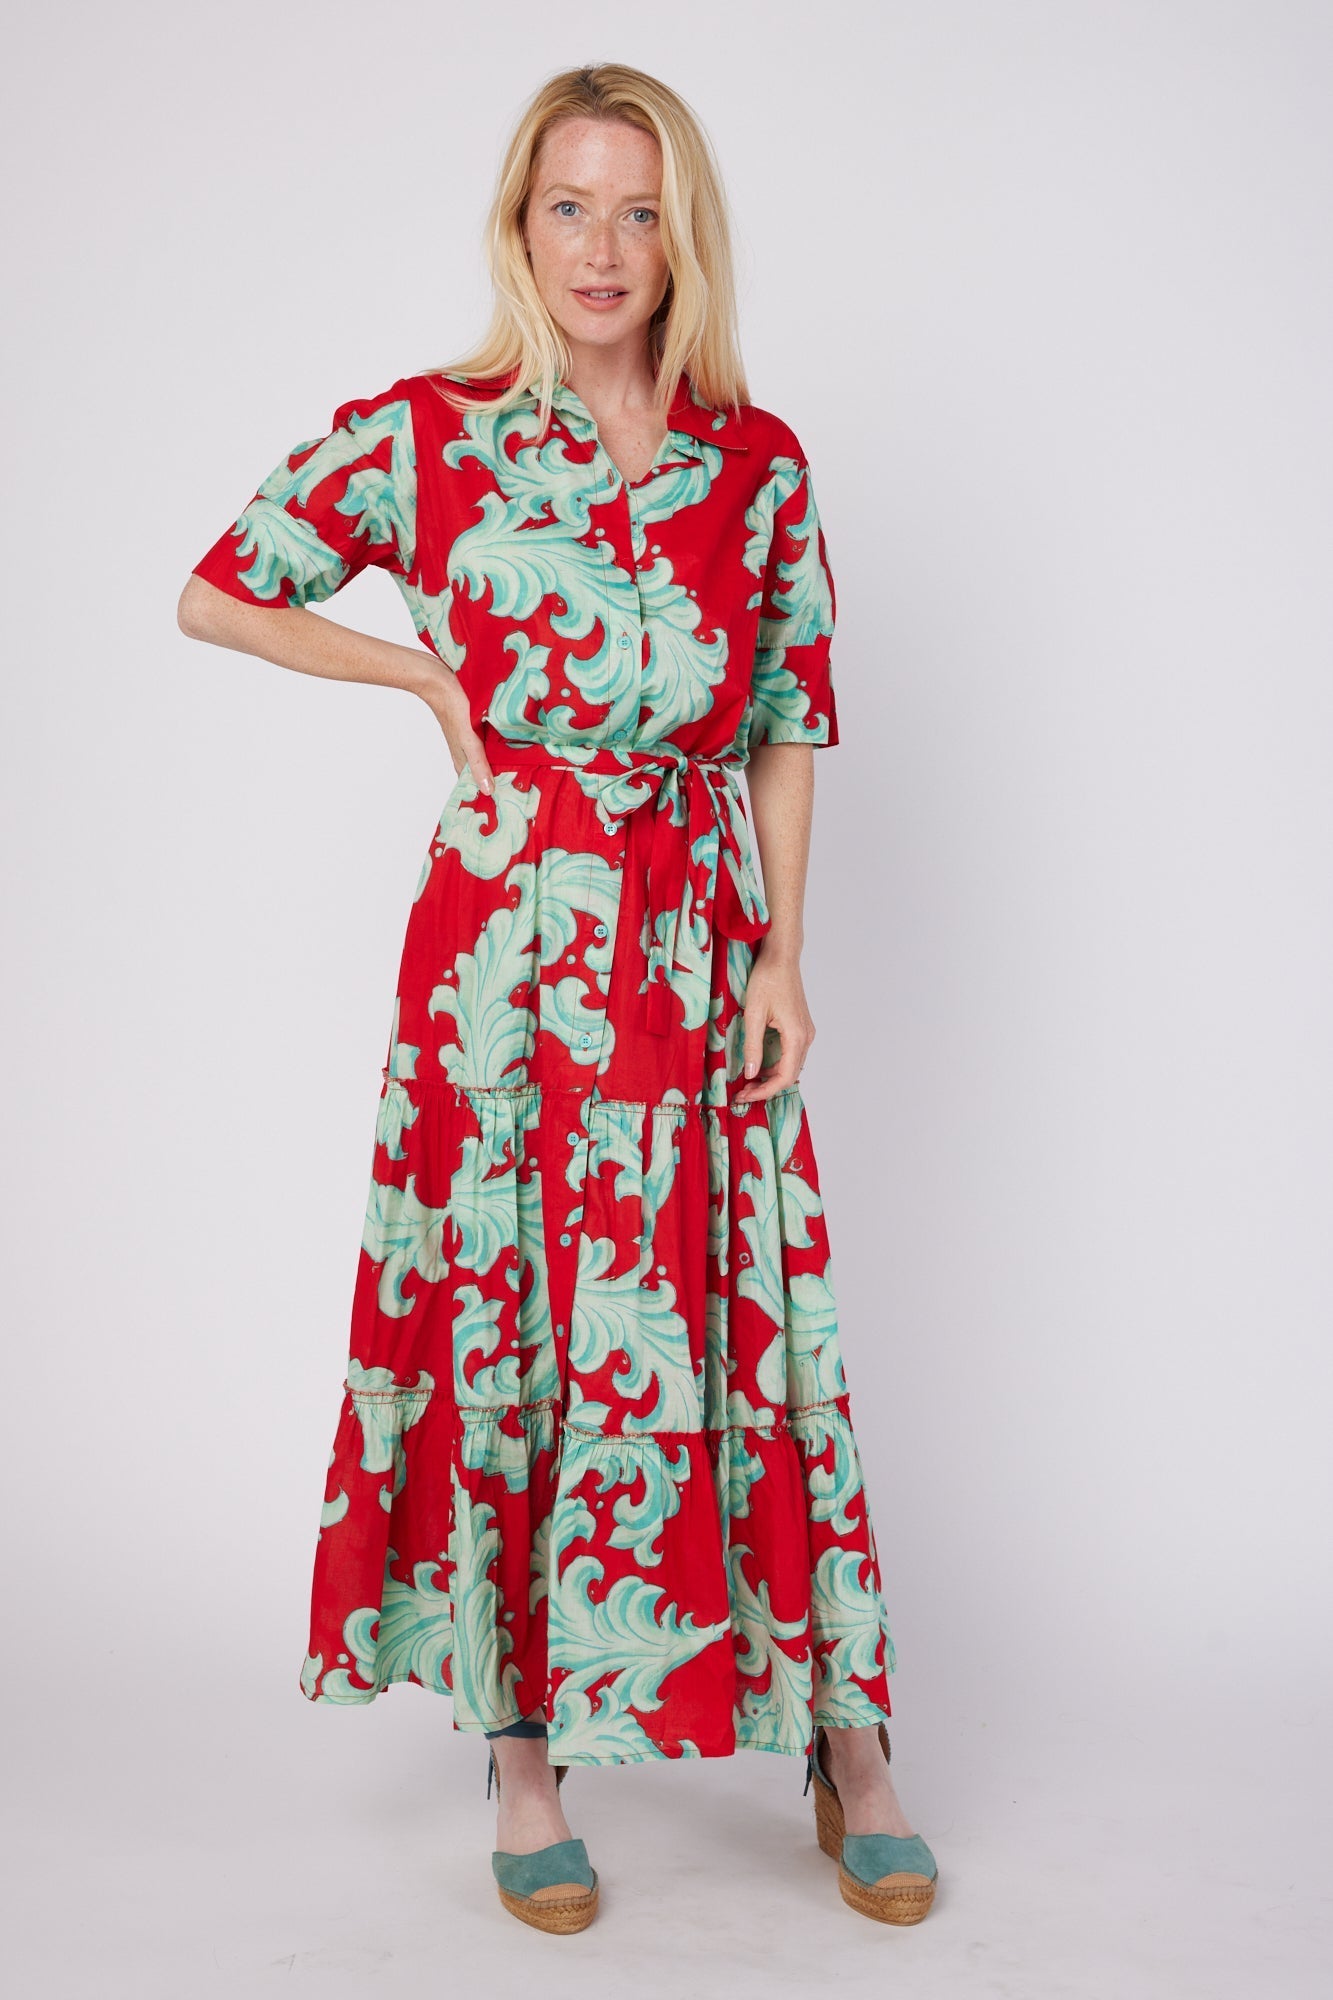 ModaPosa Alcee Short Puff Sleeve Maxi Dress with Collar and Detachable Belt in Crimson Mist Baroque . Discover women's resort dresses and lifestyle clothing inspired by the Mediterranean. Free worldwide shipping available!